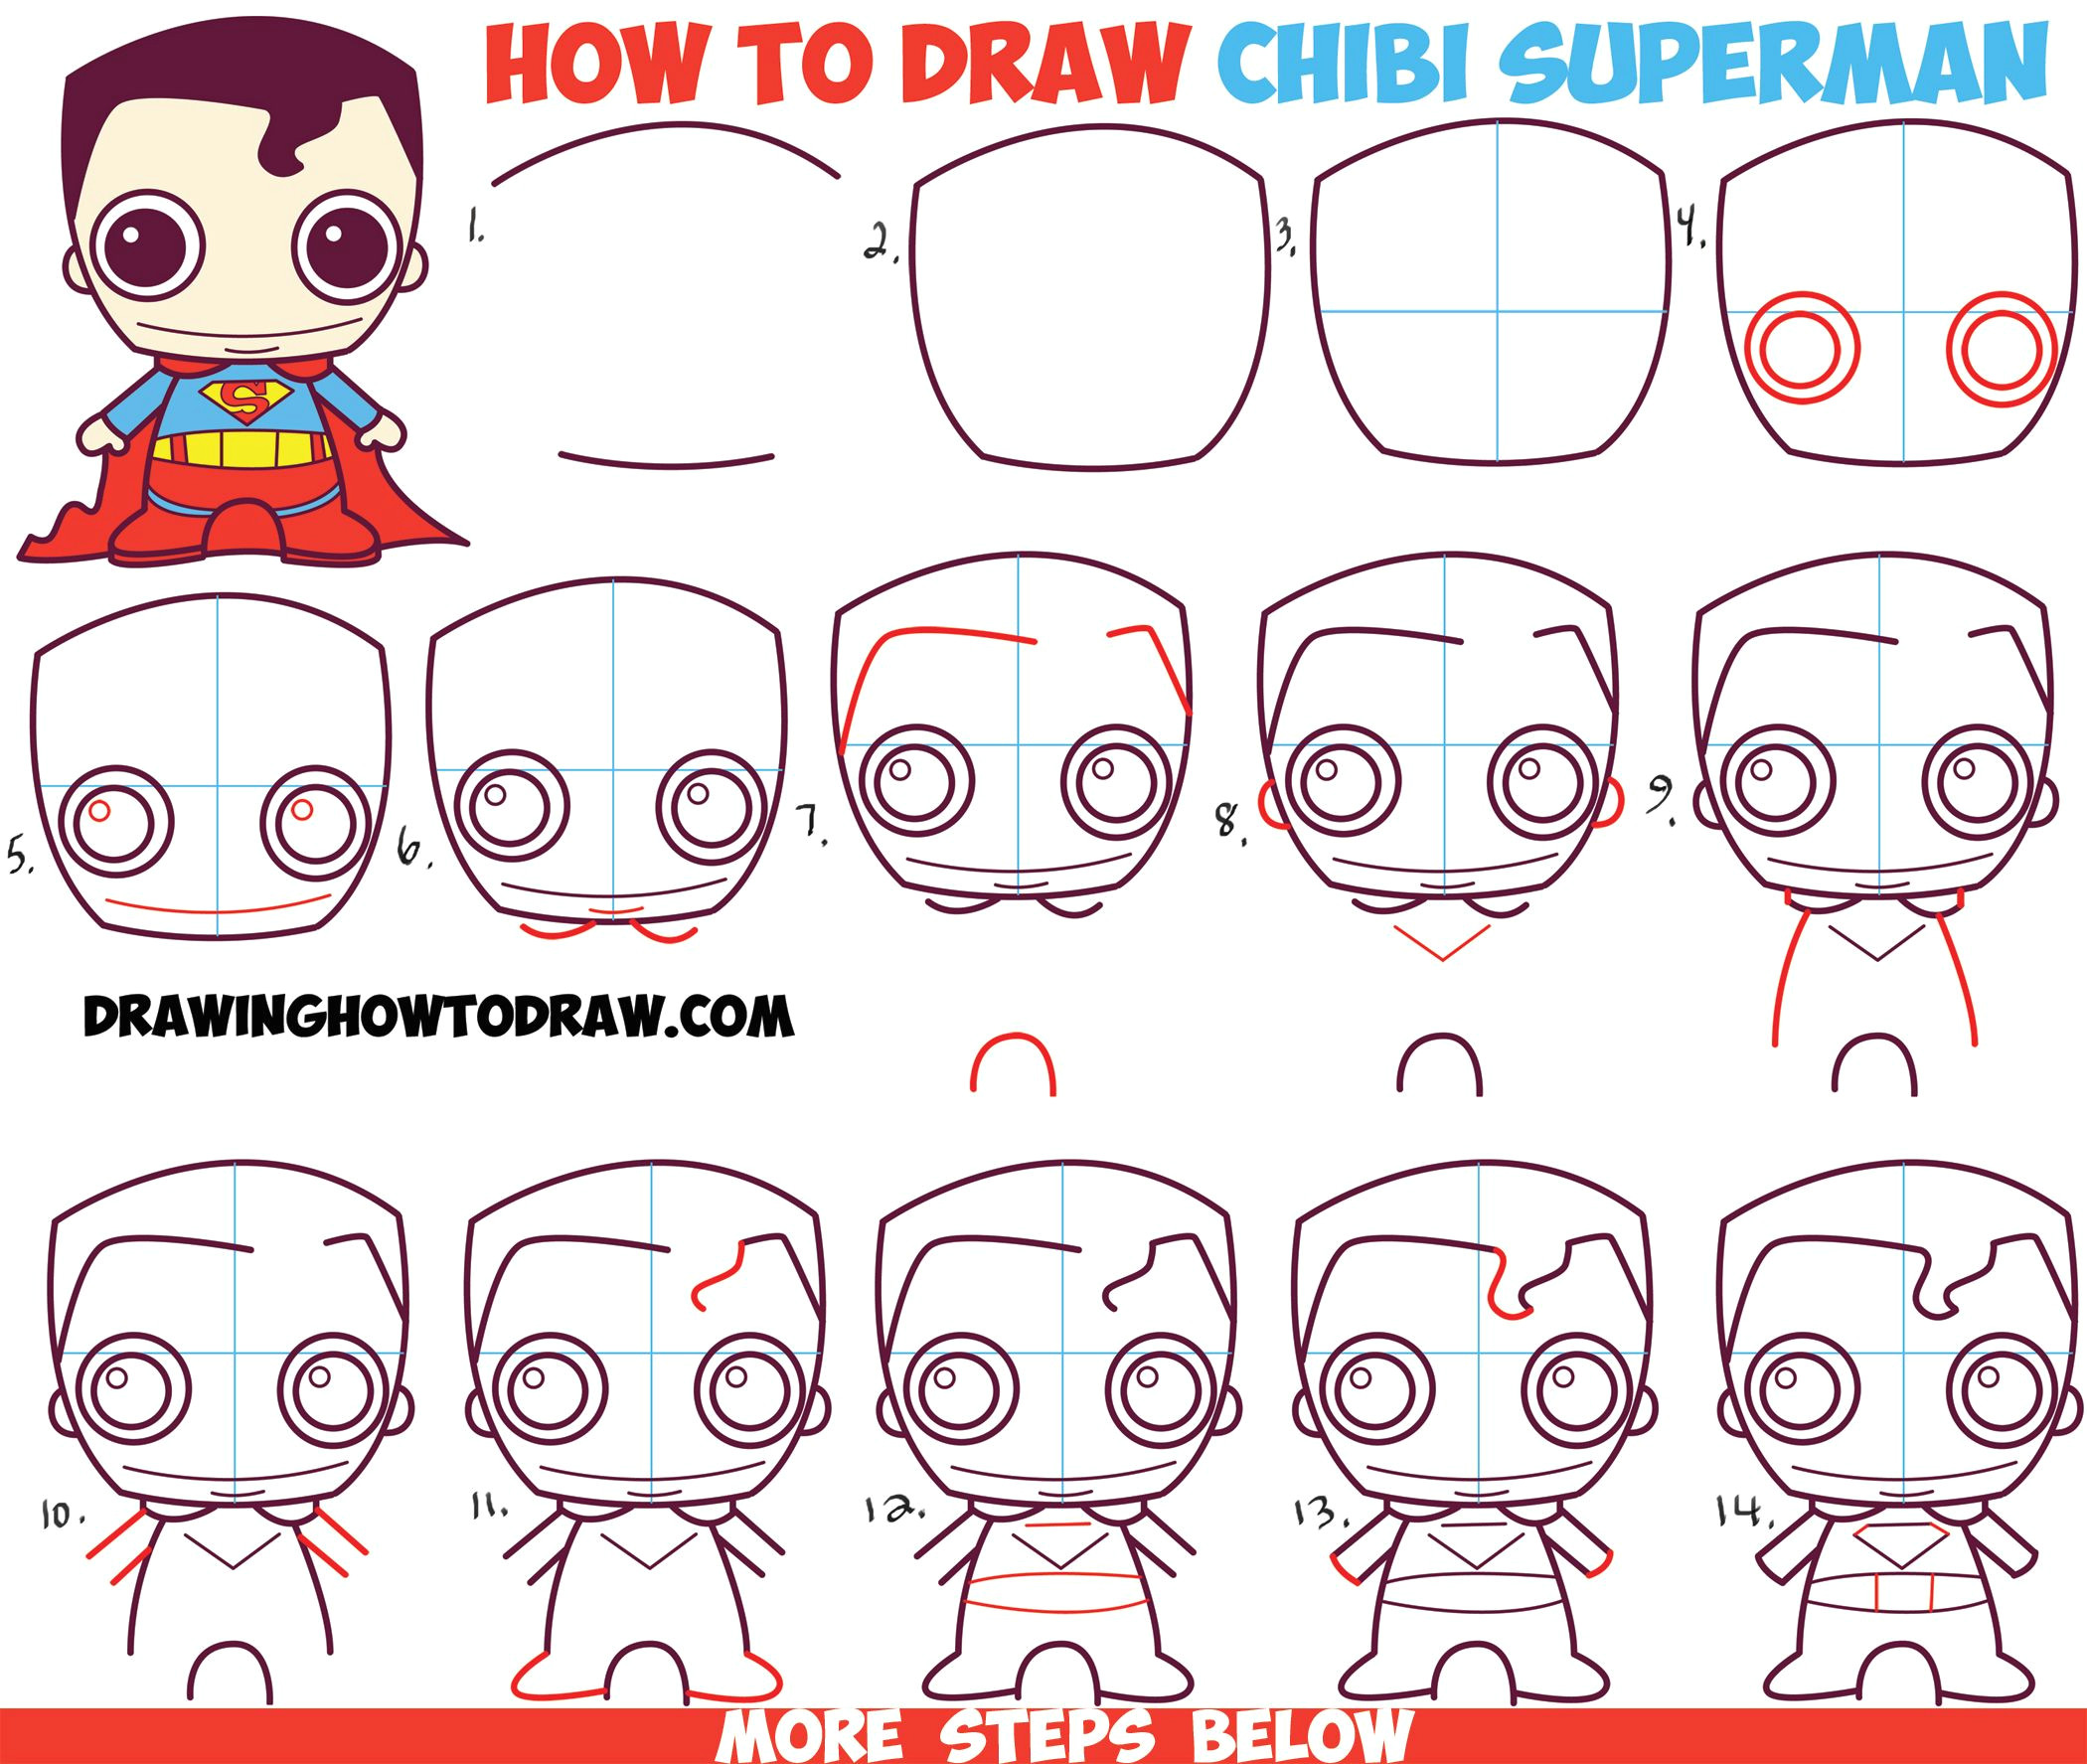 how to draw cute chibi superman from dc comics in easy step by step drawing tutorial for kids